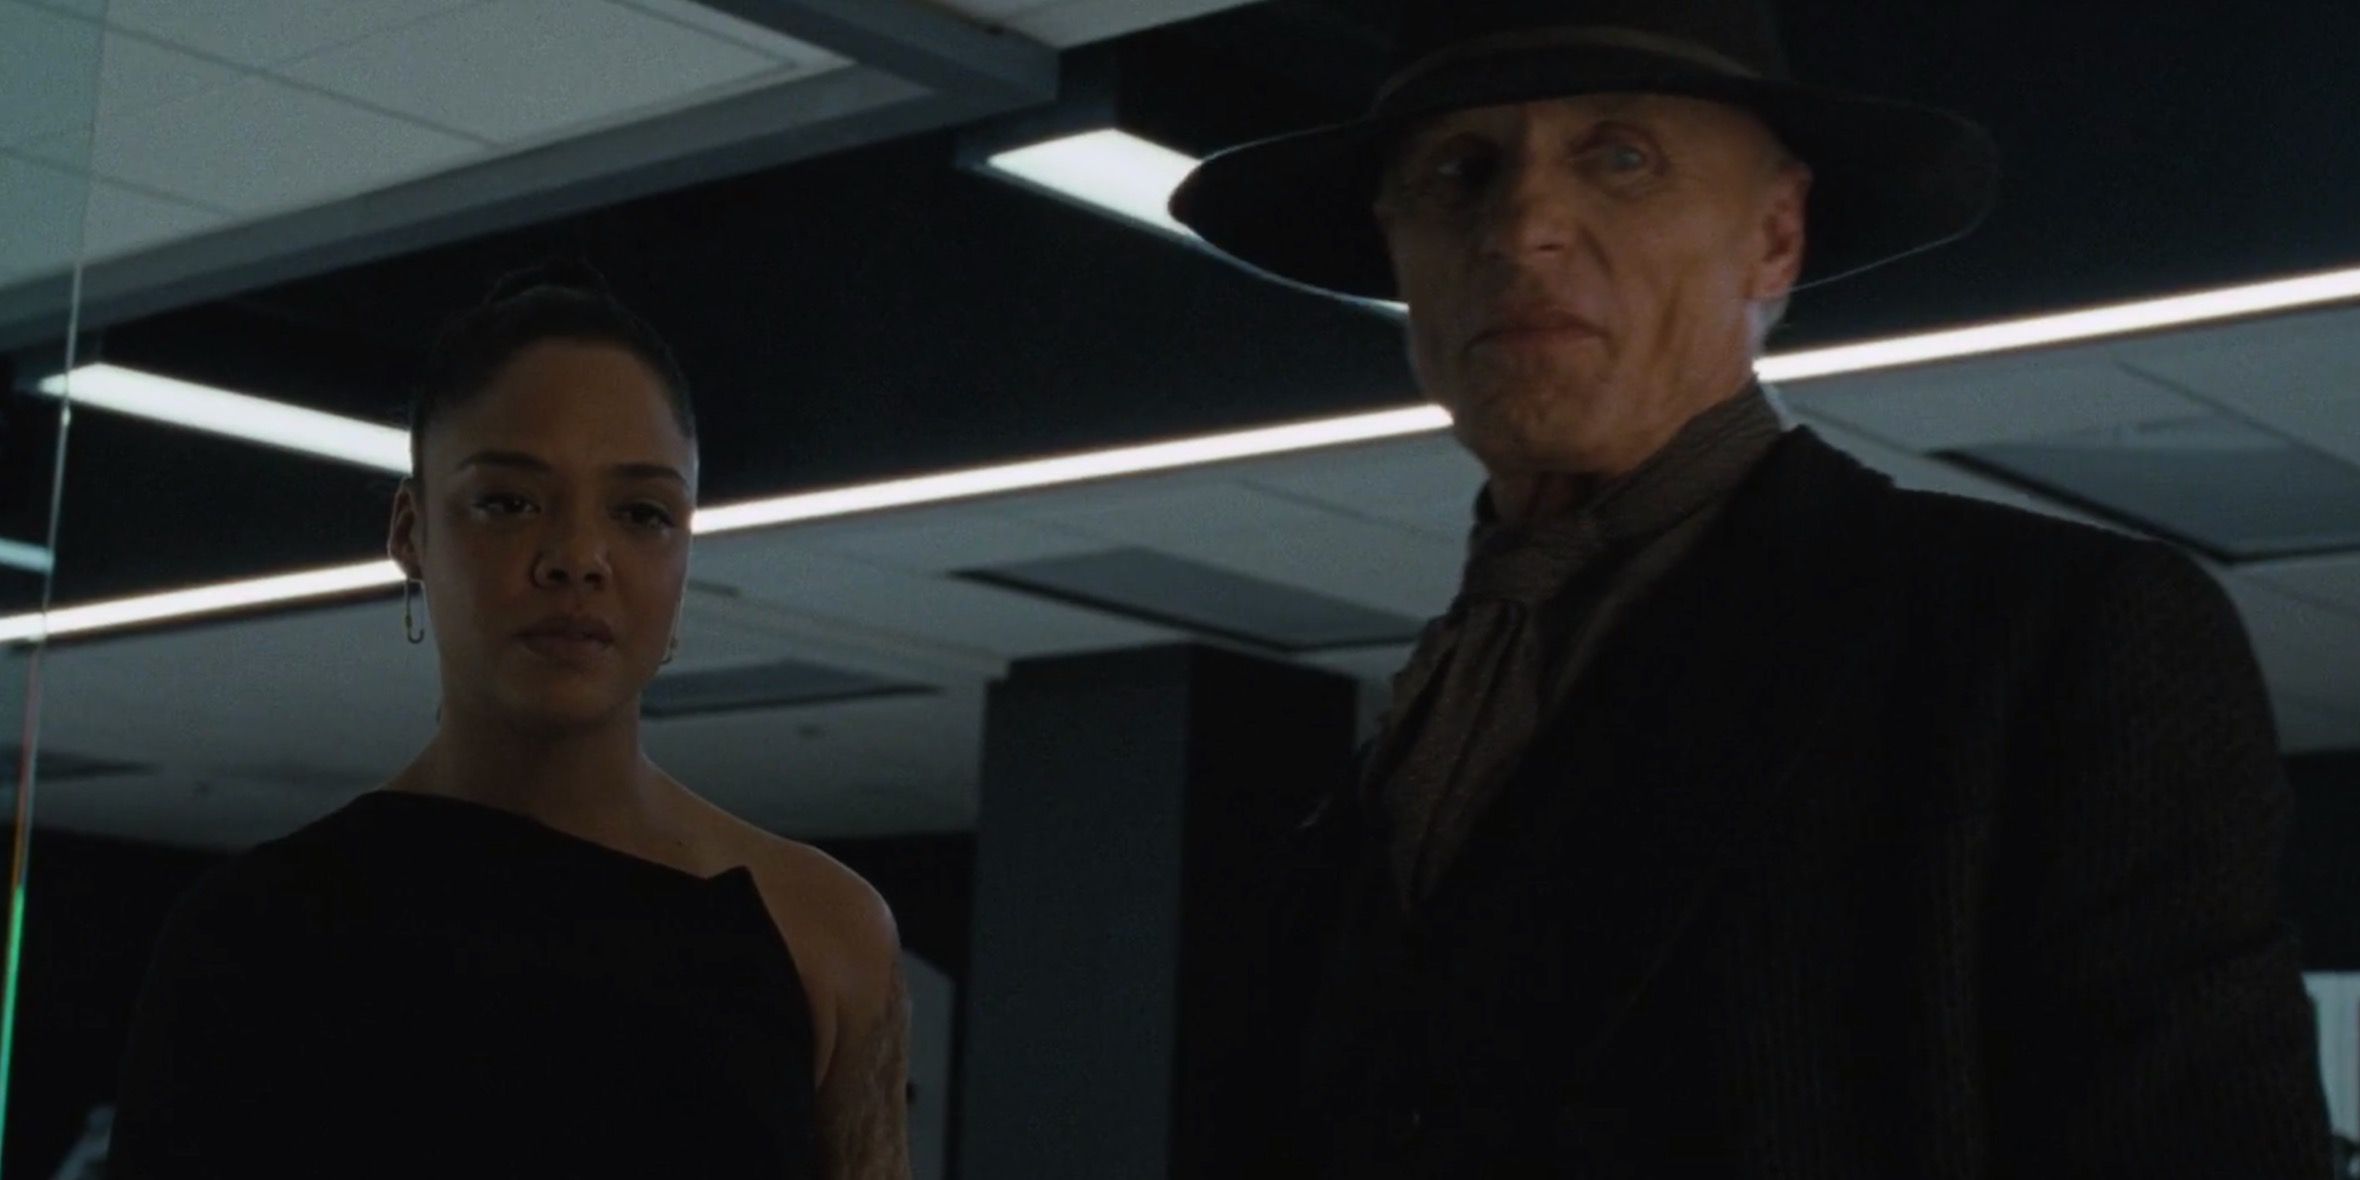 Charlotte Hale/Dolores Abernathy and William standing together in Westworld